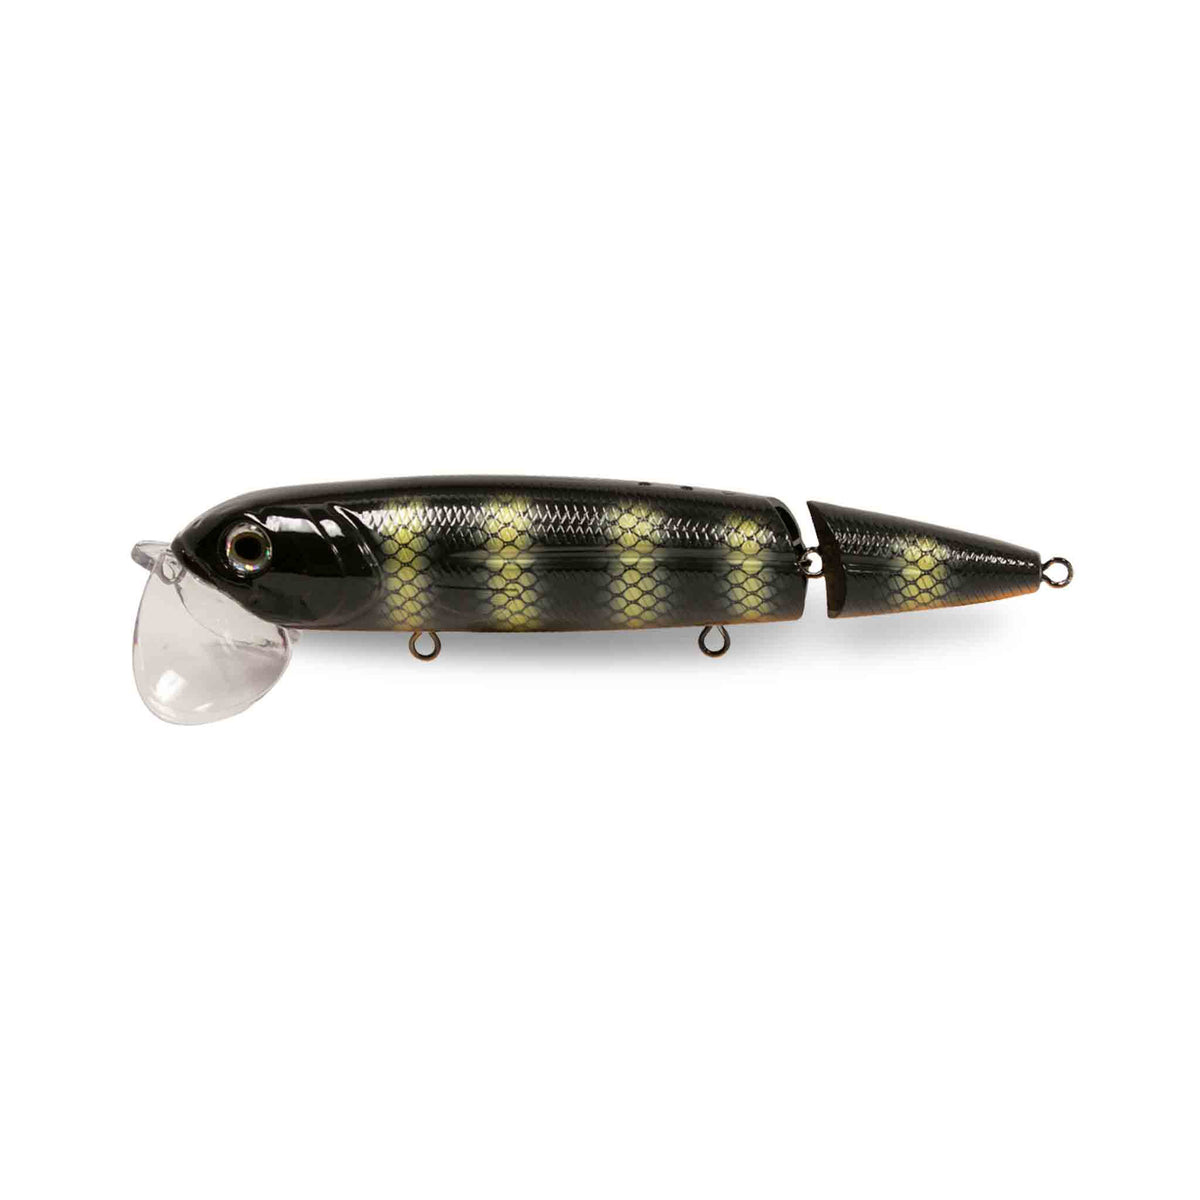 Suick Musky Lures Frankensuick Dive and Rise Bait Raging Perch